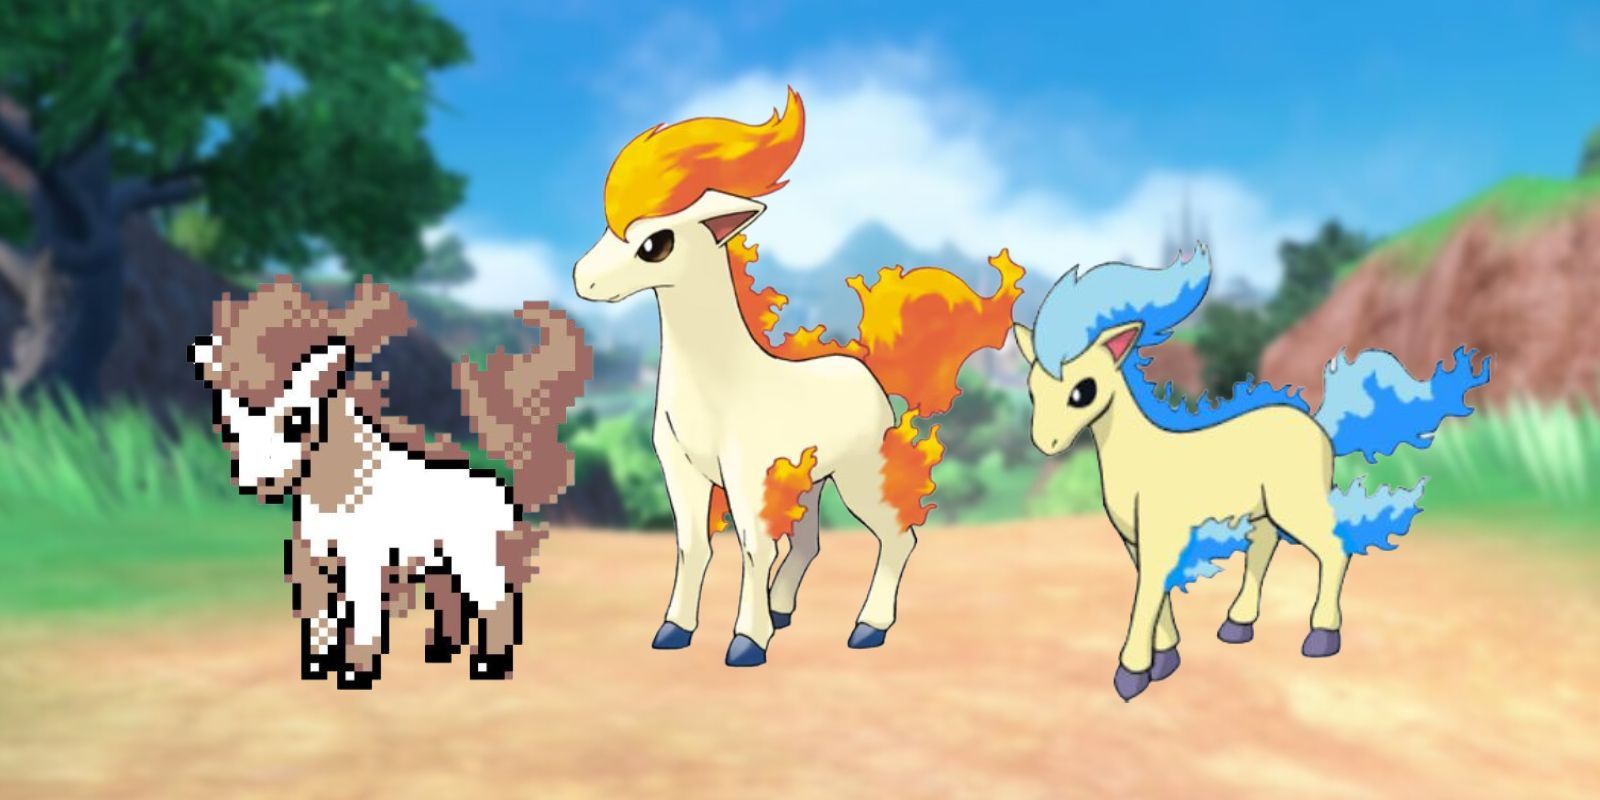 Ponyta in regular form and flanked by the old shiny and new shiny forms